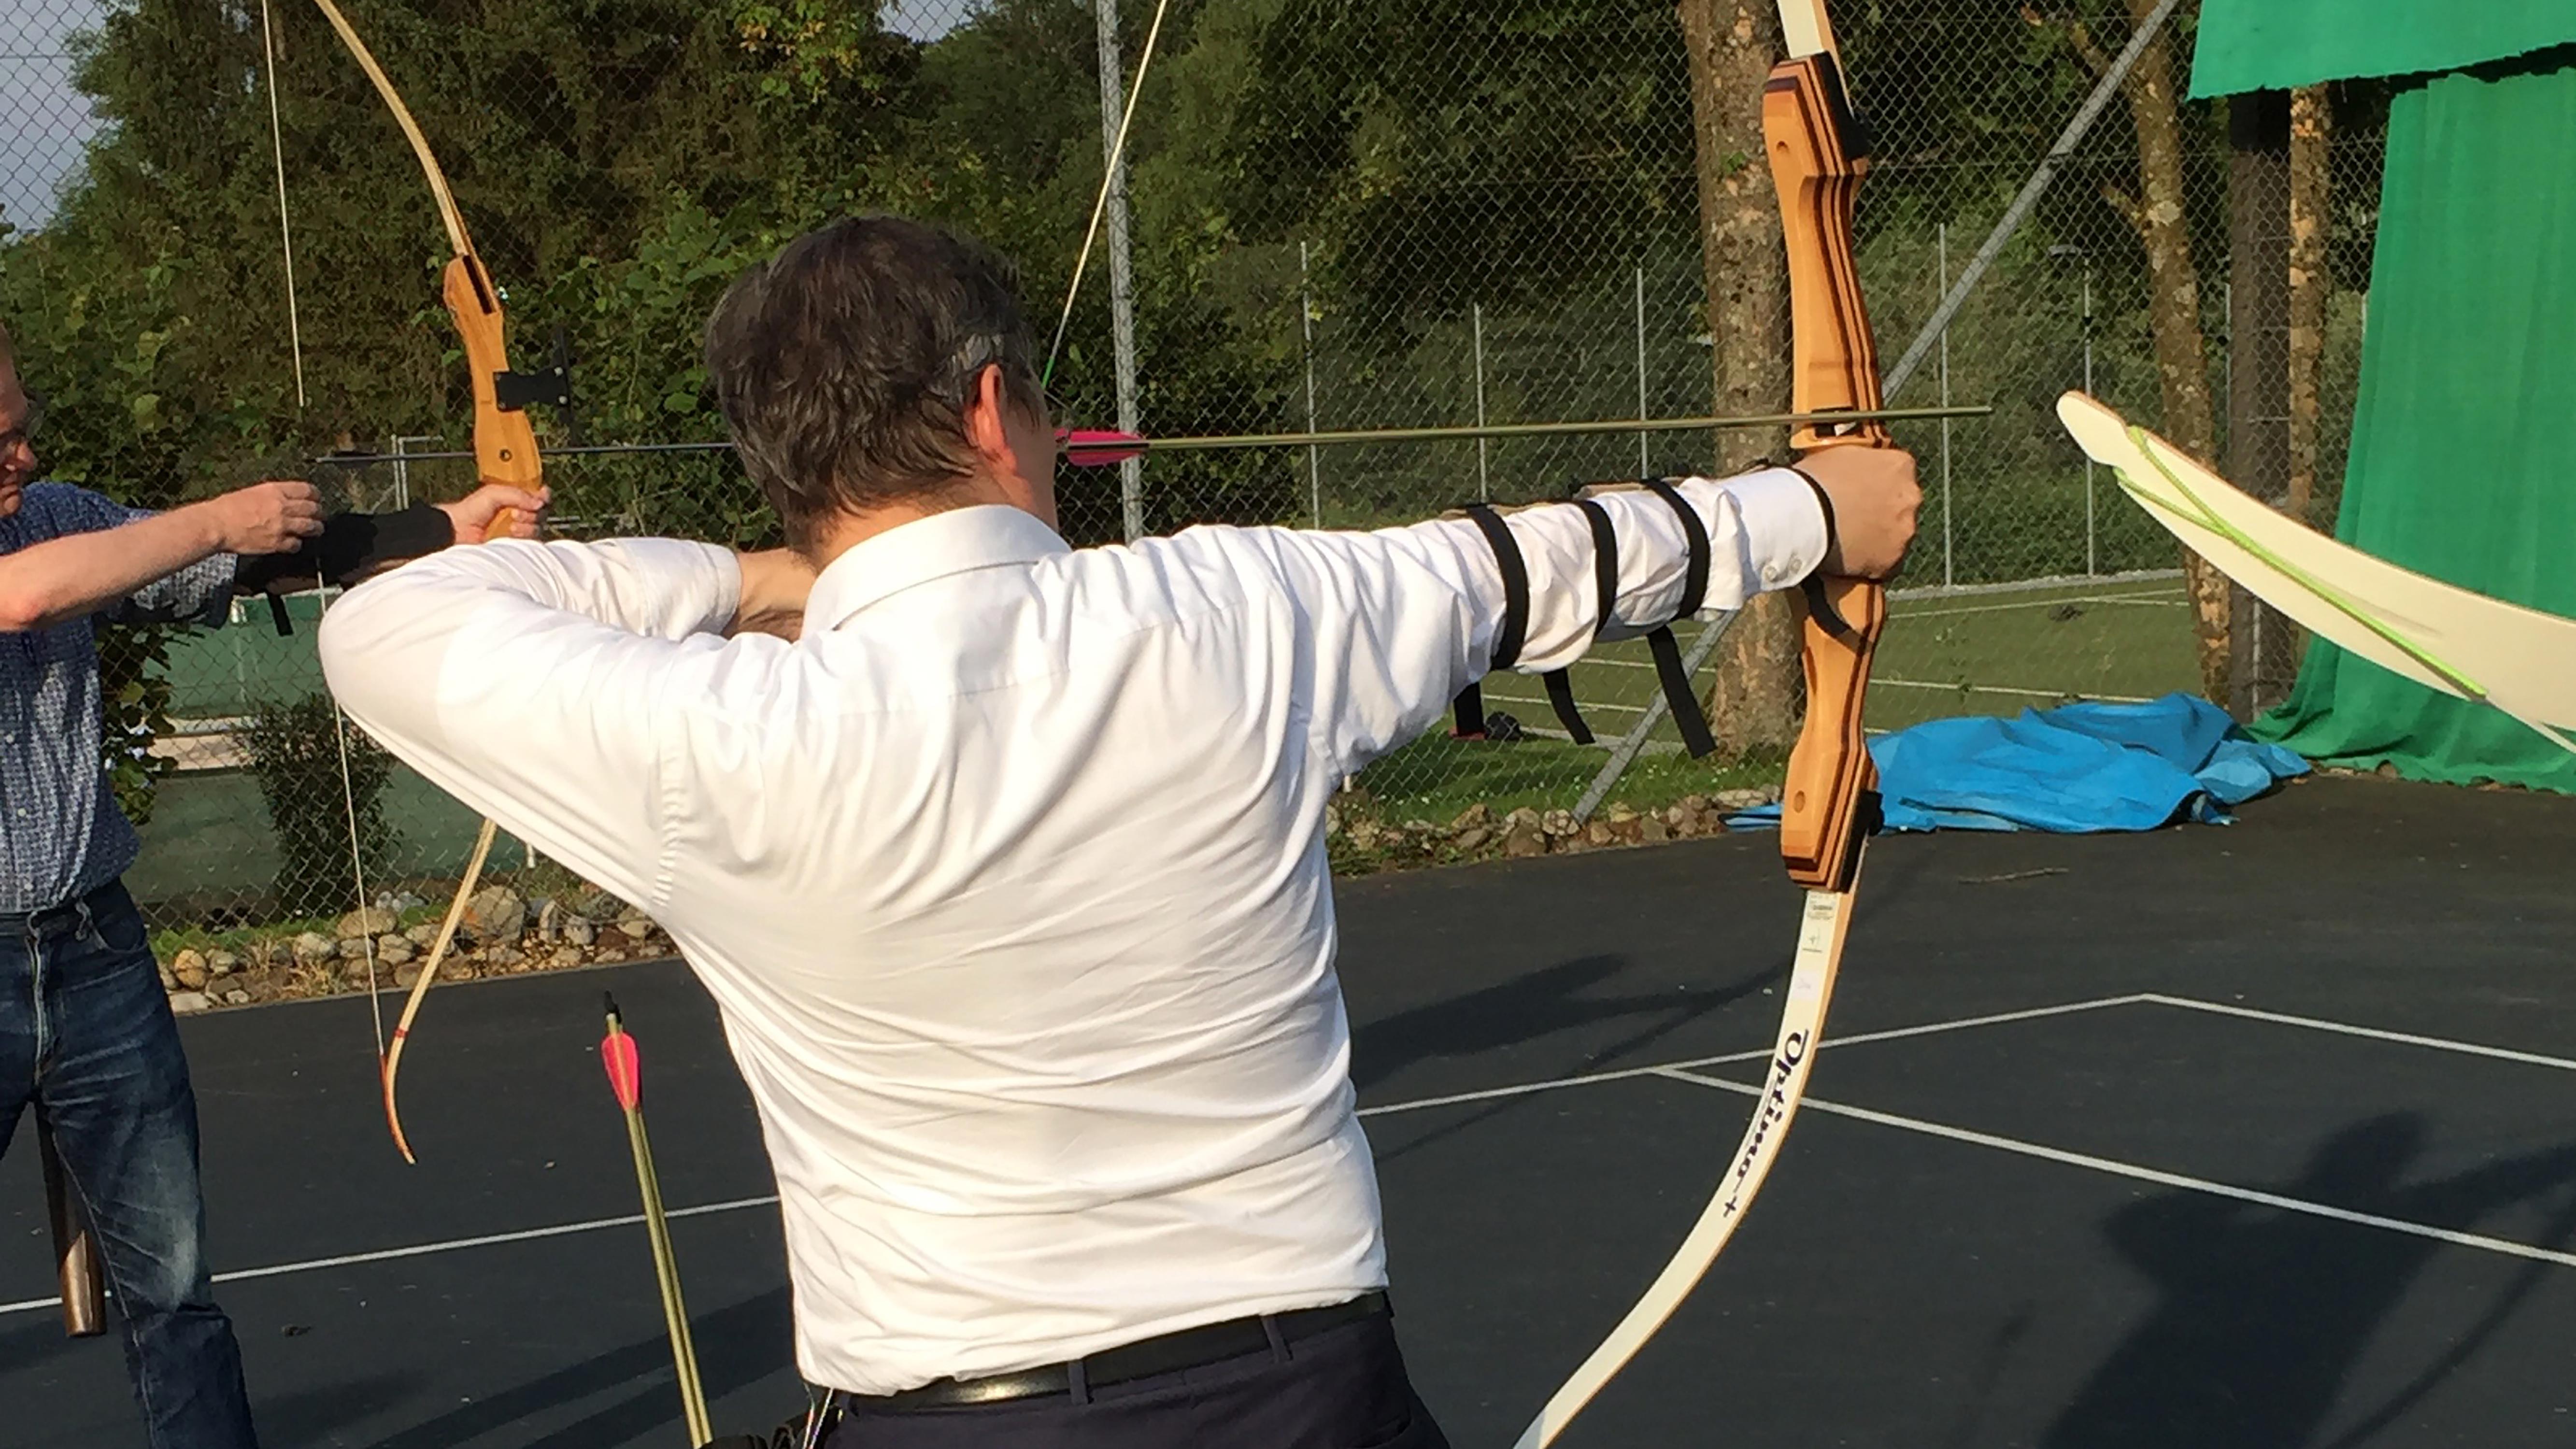 Hitting the bullseye: For more than 20 years, the leadership teams of UZH and ETH Zurich have got together every year for the “Rektorenschiessen.” This picture was taken in July 2016, when Sarah Springman, Rector of ETH, narrowly beat Michael Hengartner to first place. In his final “Rektorenschiessen” in summer 2019, he even came out on top, but unfortunately there are no pictures of his victory.